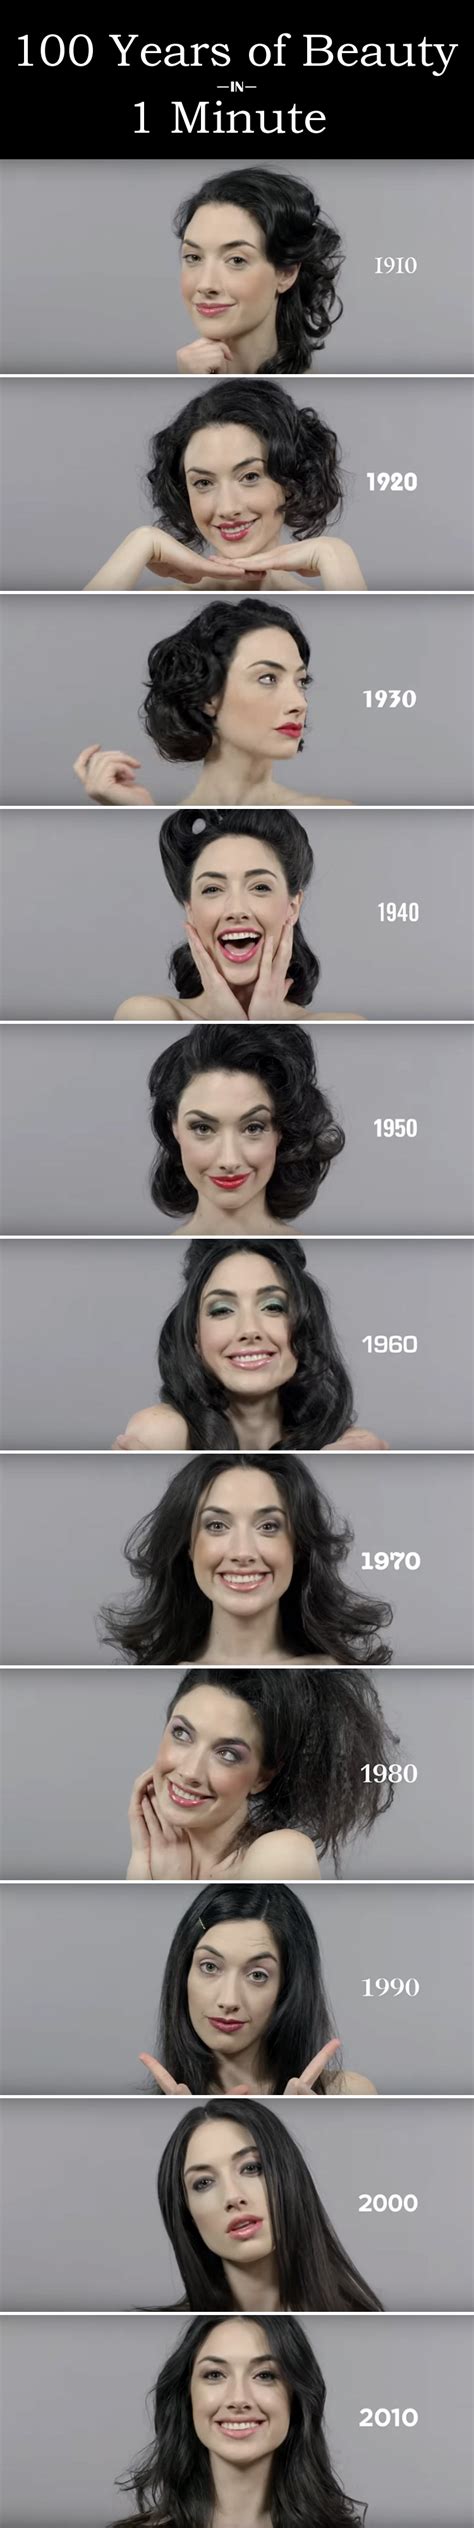 View 100 Years Of Beauty Trends In Only 1 Minute